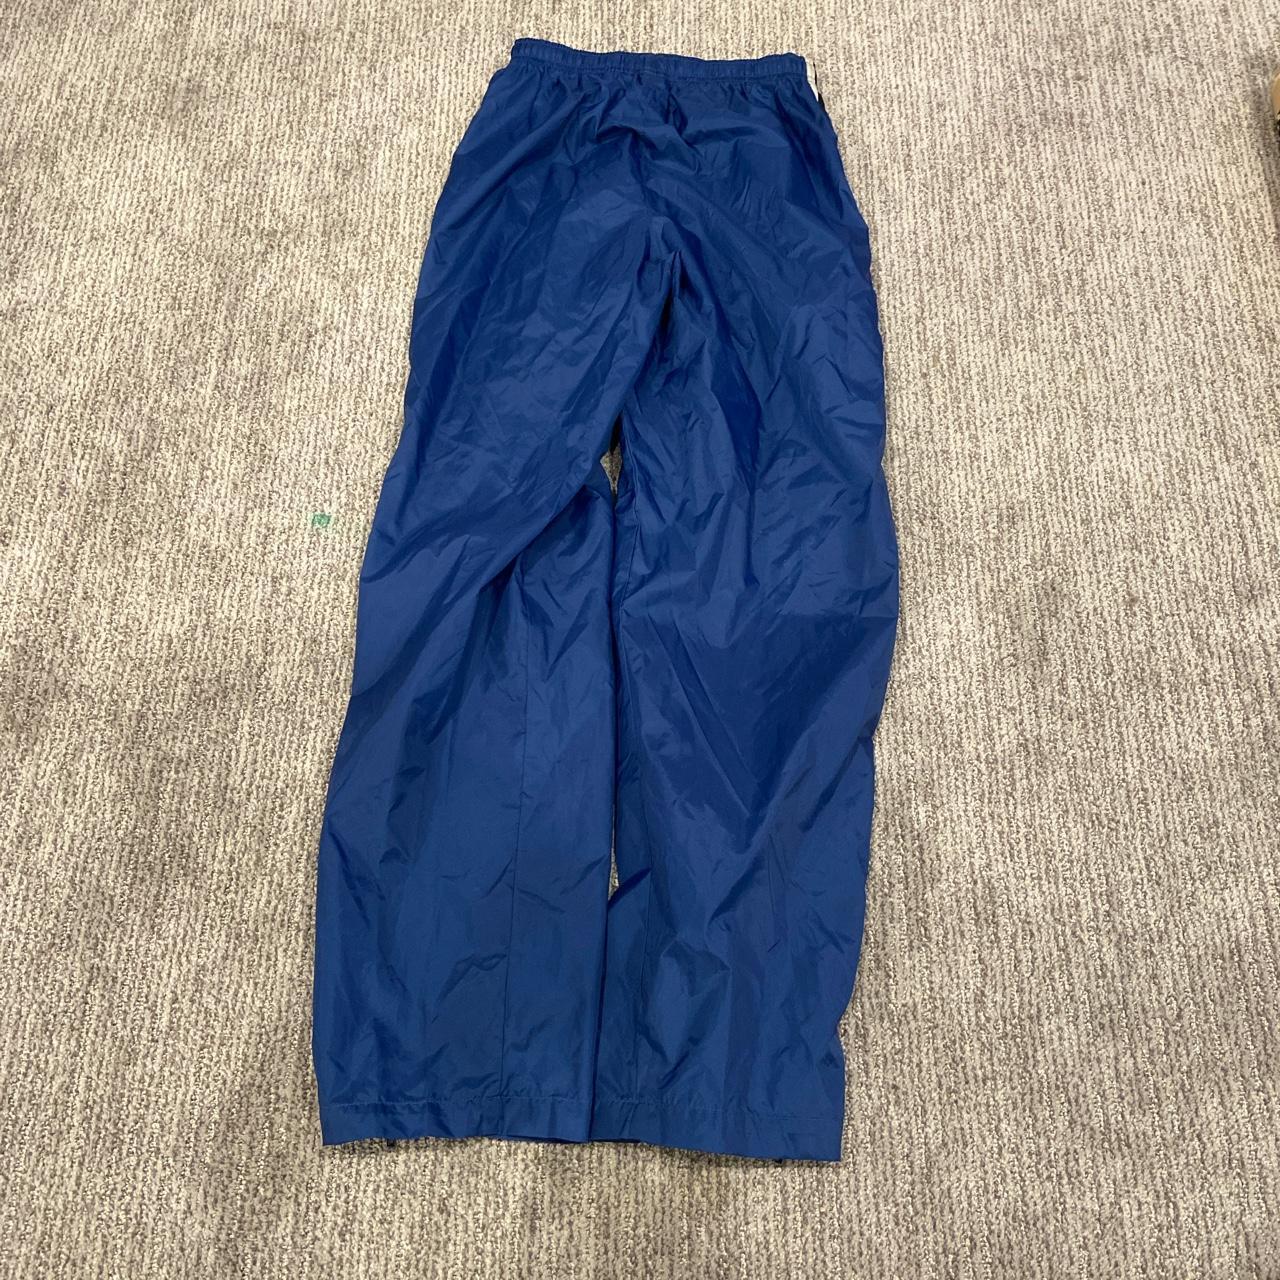 Vintage NIKE parachute pants Size: Small Could be... - Depop